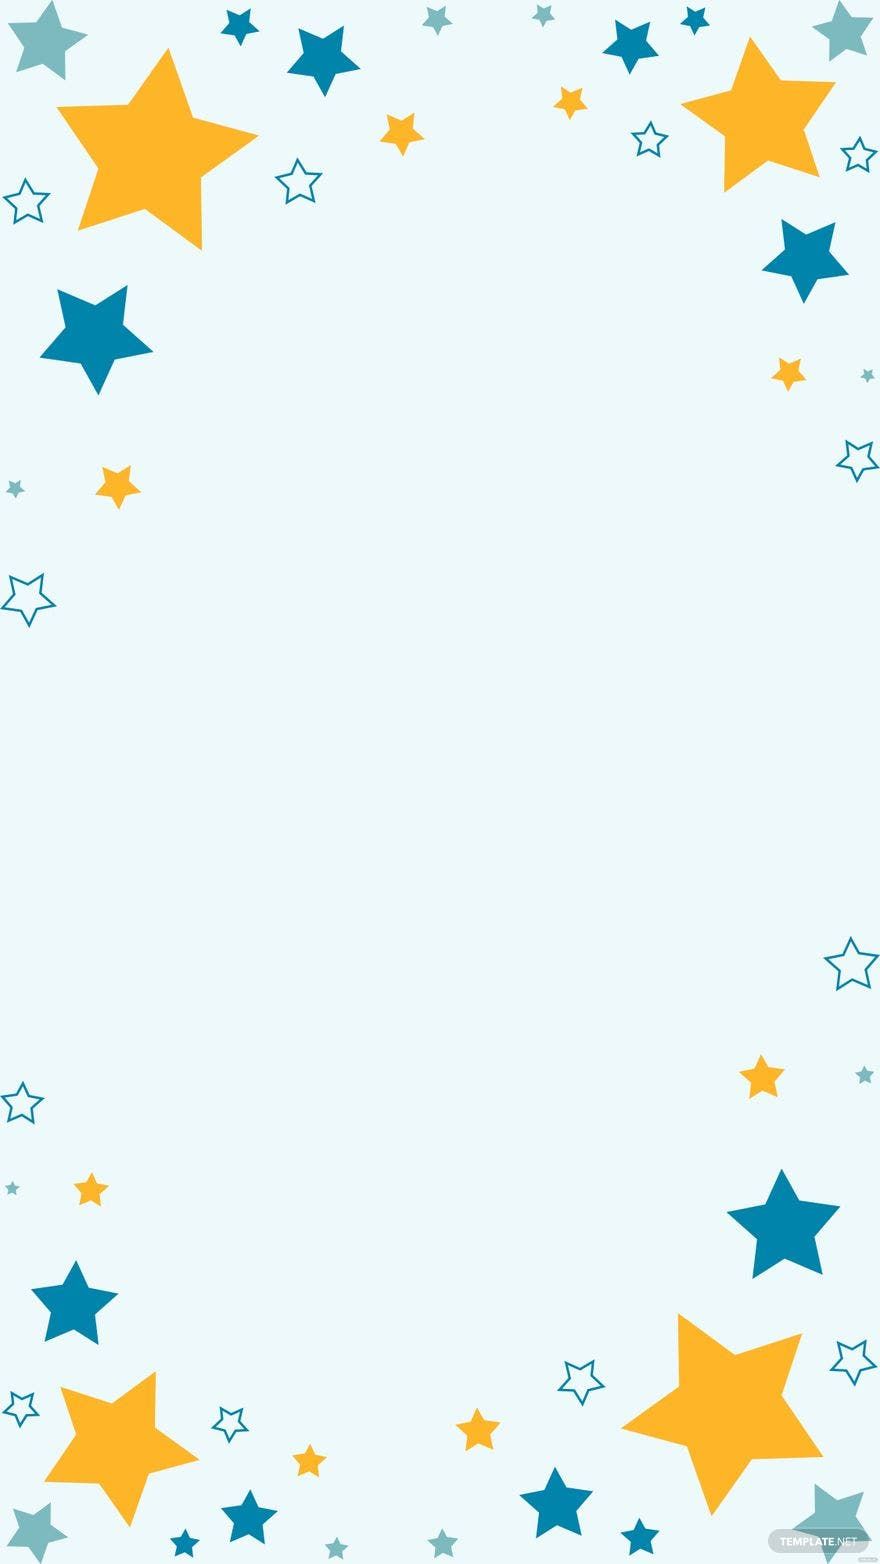 Free Star Background Vector